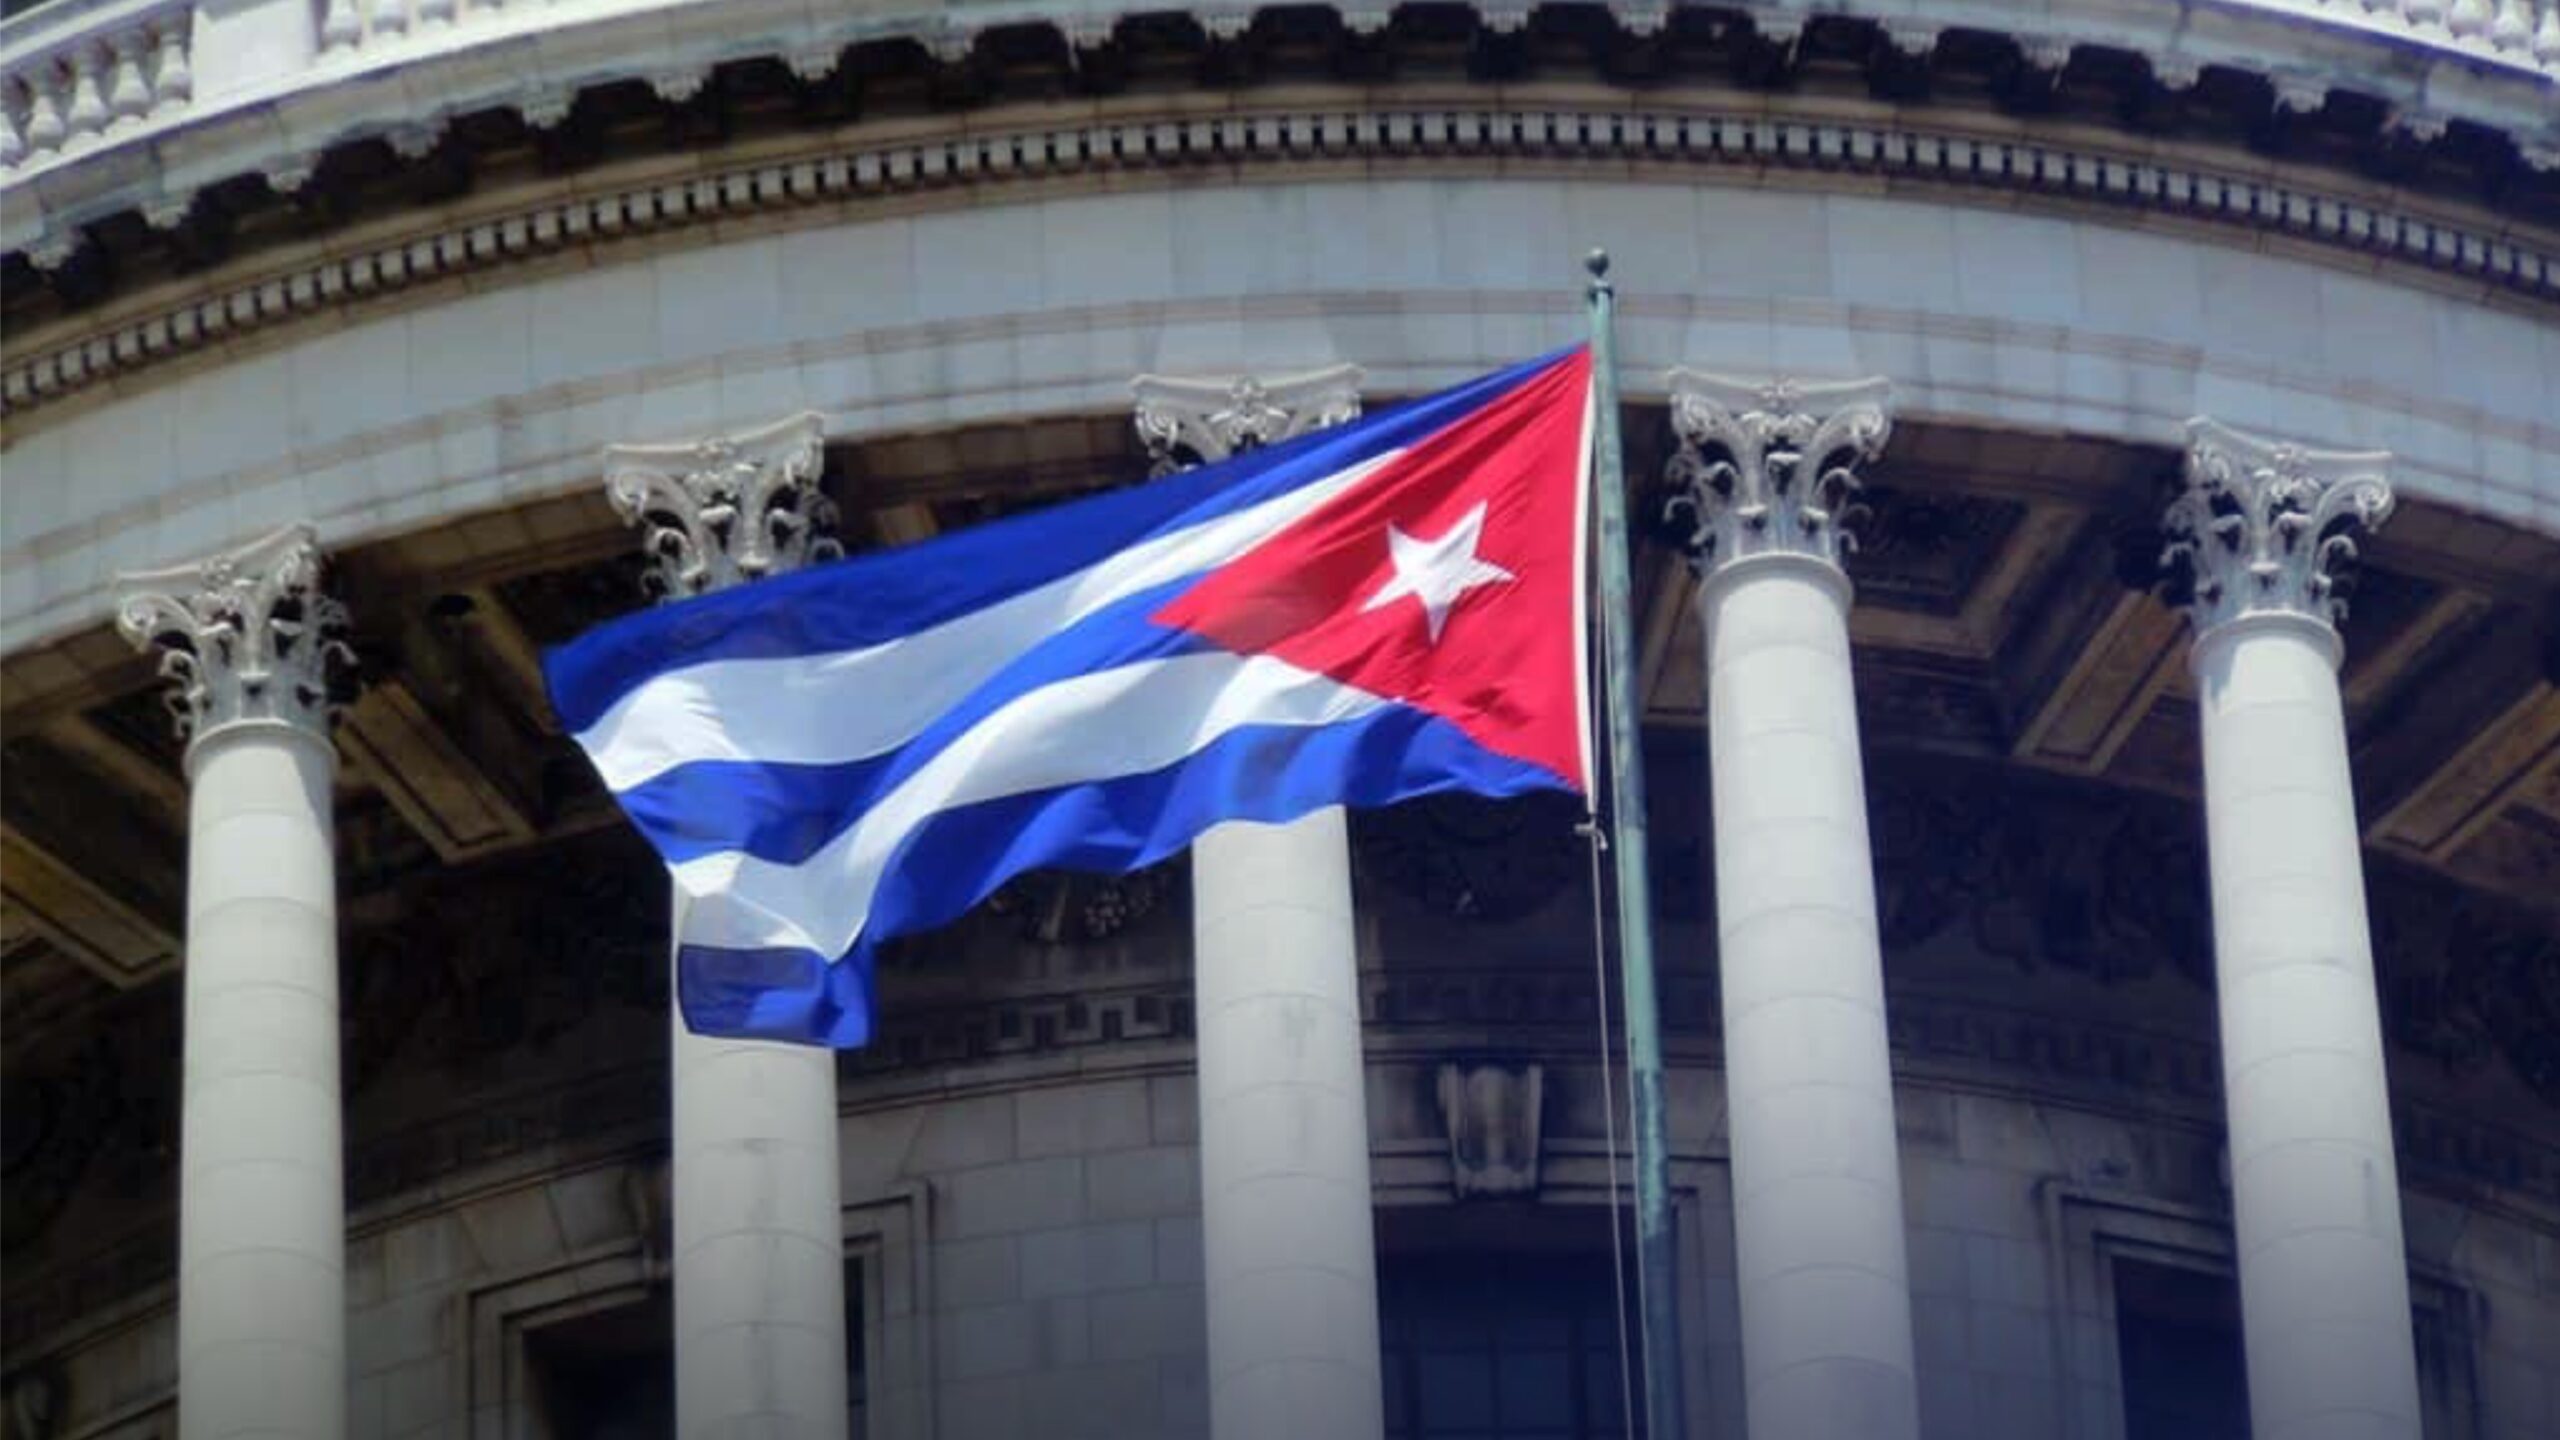 Cuba Passes ‘Misinformation’ Law Calling Online Criticism Of The Government ‘Cyberterrorism’ - Harbingers Daily